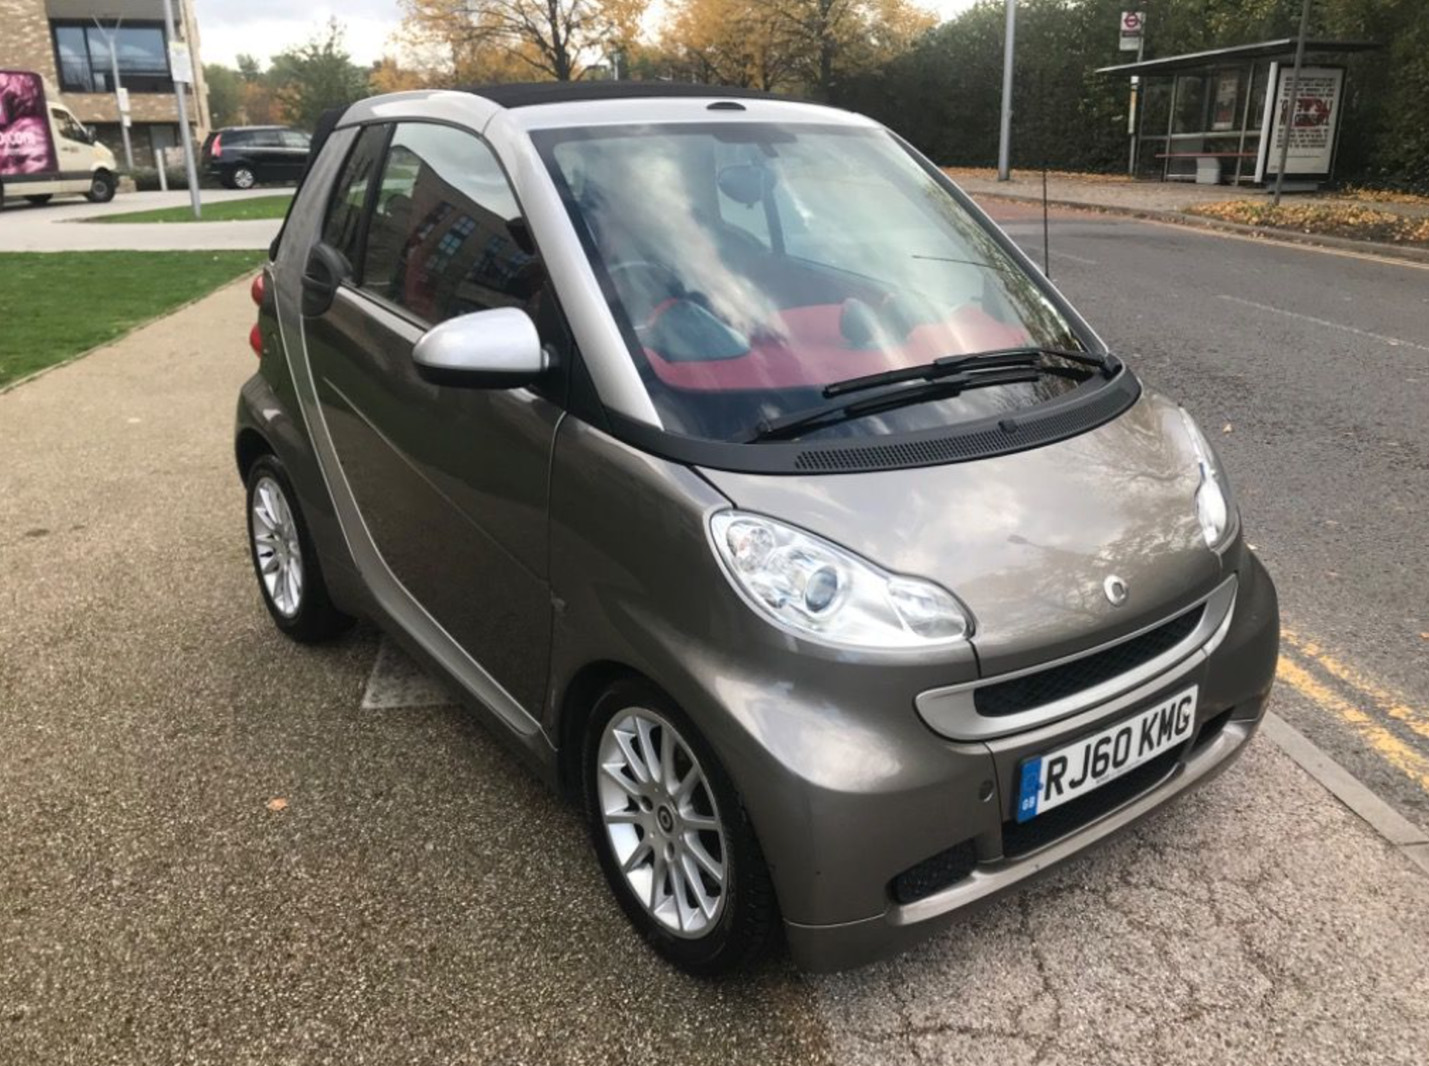 https://www.autocar.co.uk/sites/autocar.co.uk/files/images/car-reviews/first-drives/legacy/95-ubg-smart-fortwo-2007-one-we-found.jpg